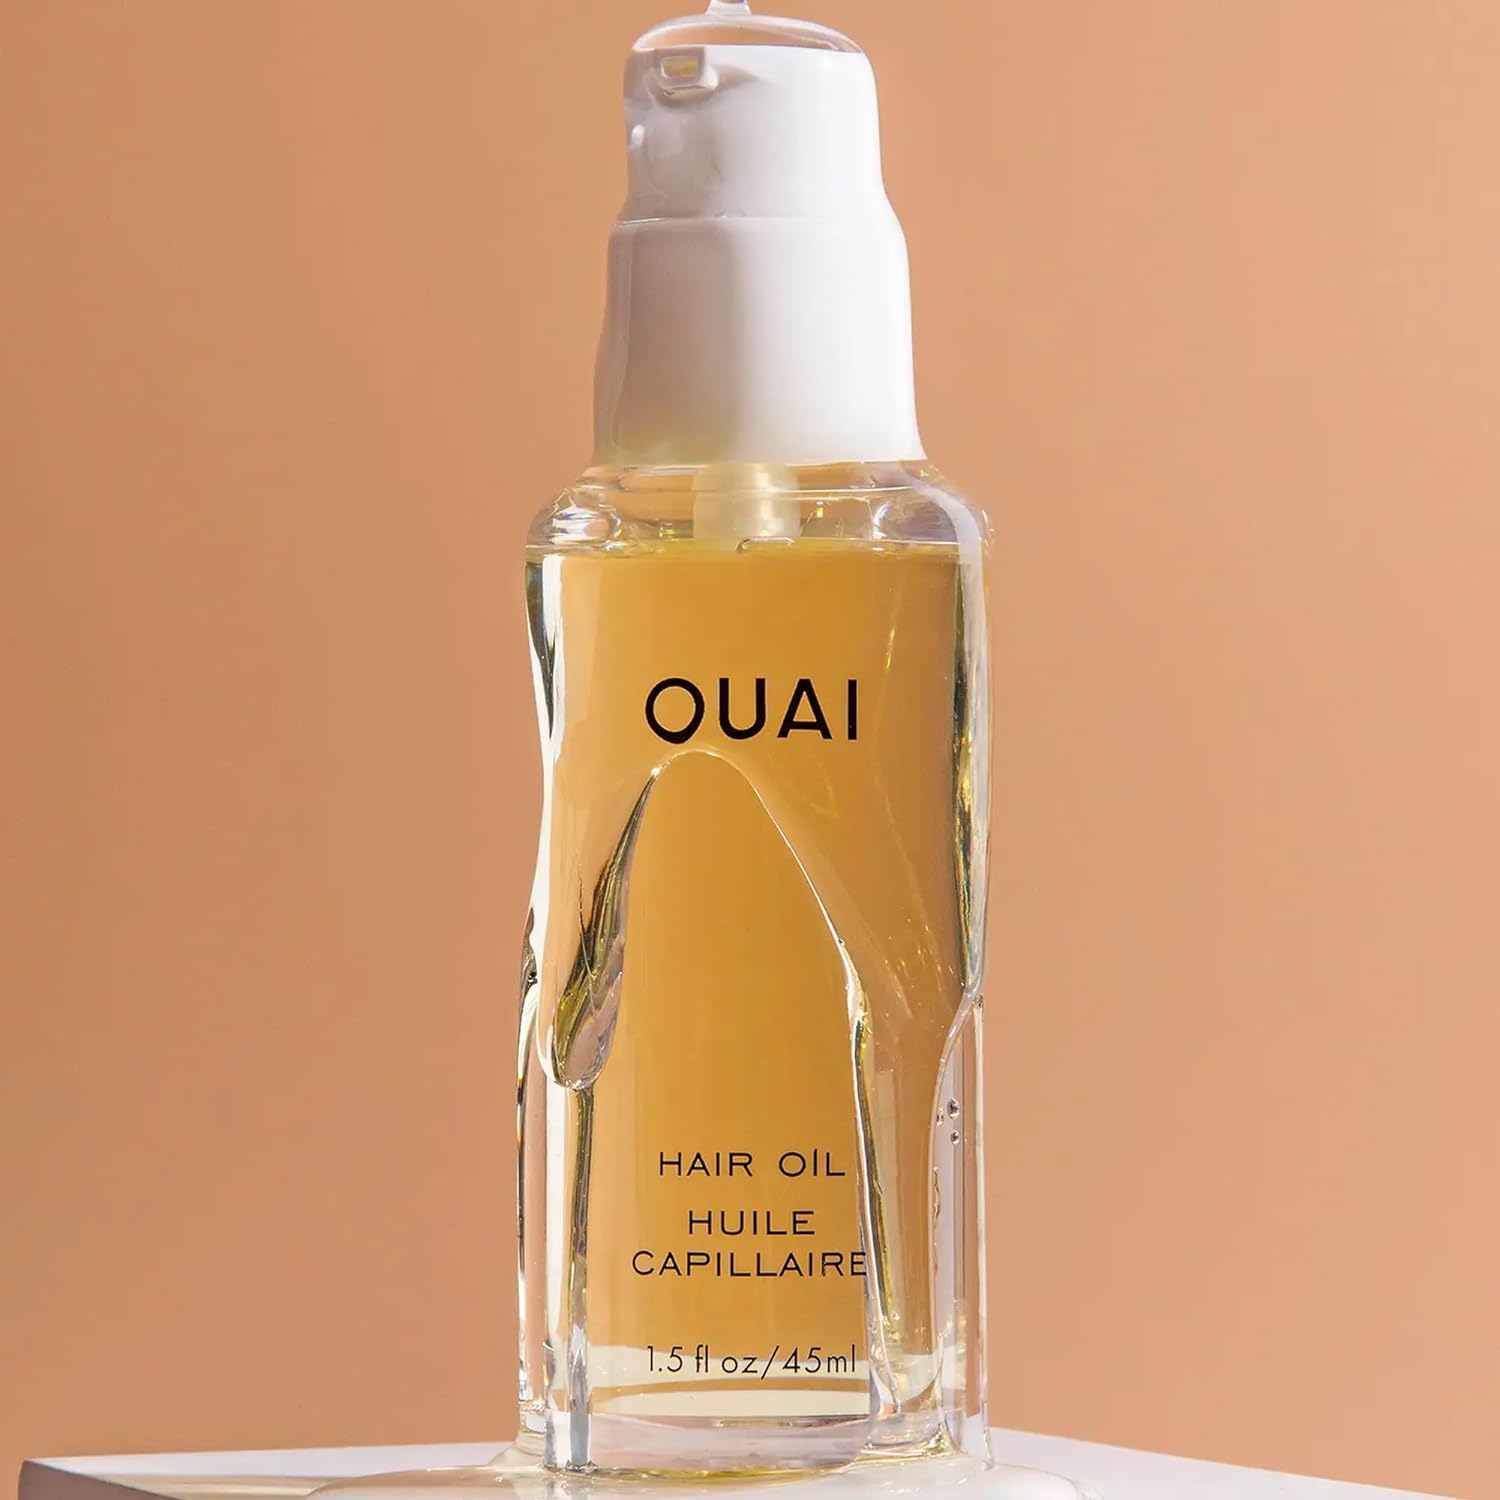 OUAI Curl Cream + Hair Oil Bundle - Hair Styling Products for Frizz Control - Includes Curl Cream (8 Oz) + Hair Oil (1.5 Oz) - 2-Piece Hair Care Set : Beauty & Personal Care